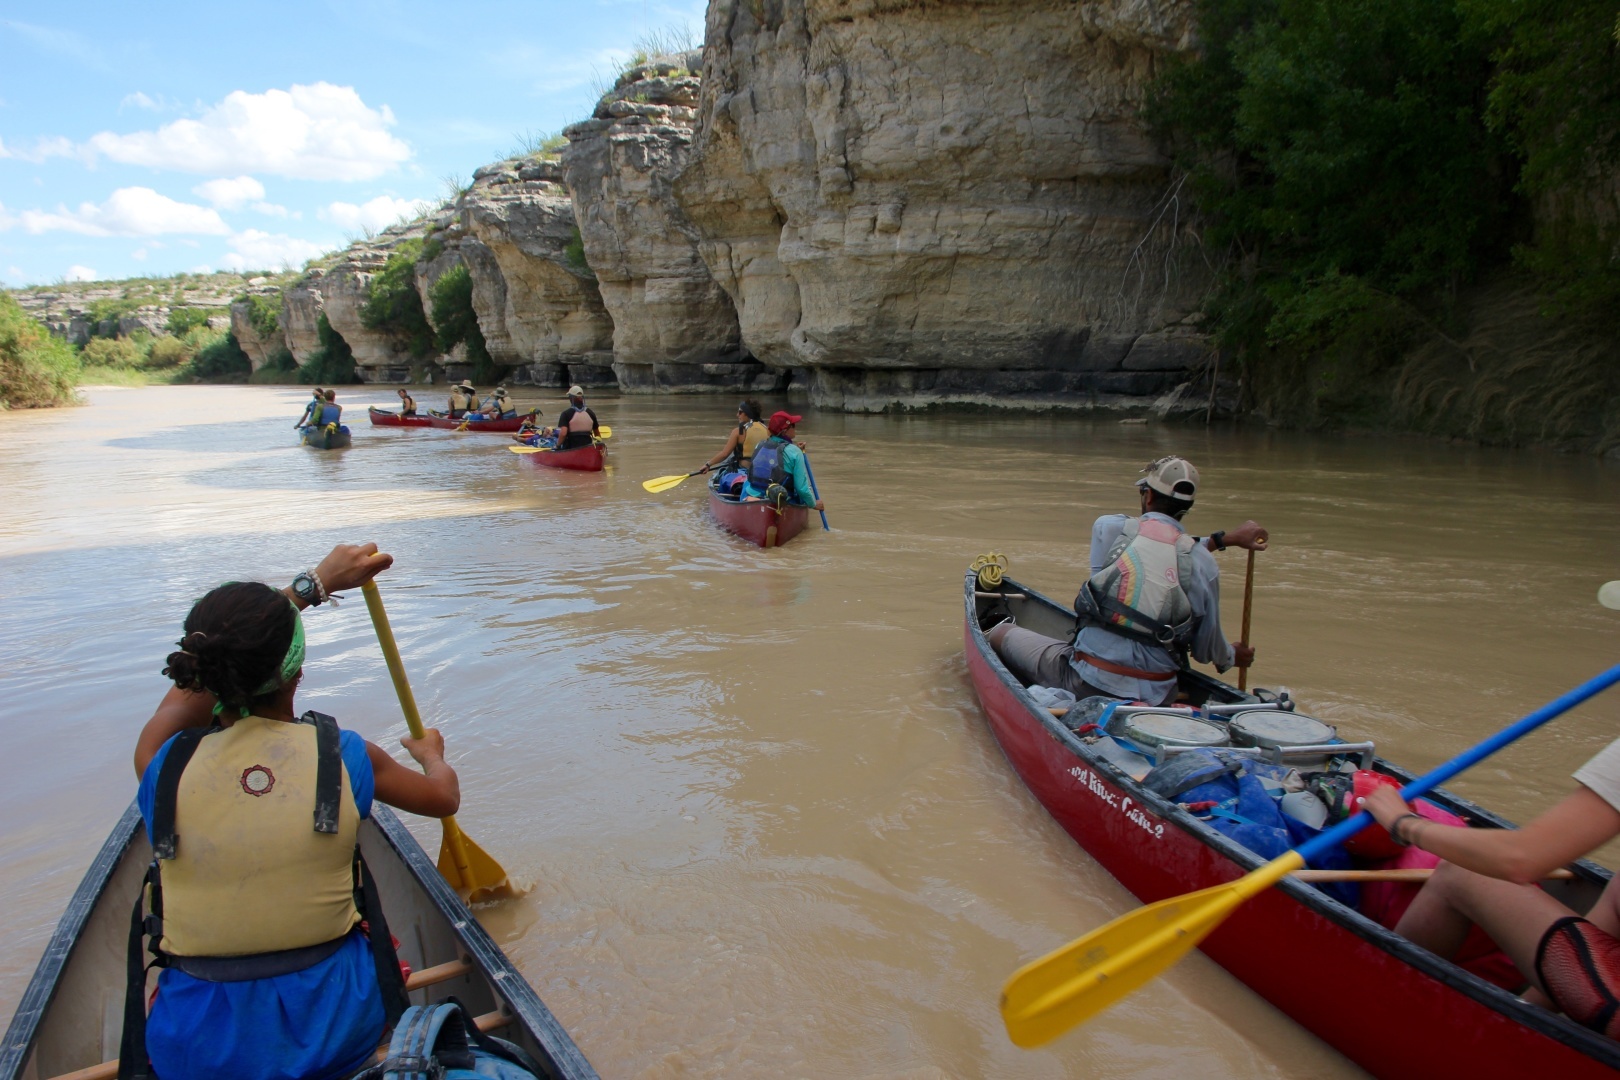 A large group of people canoeing on a river with canyon walls on the right